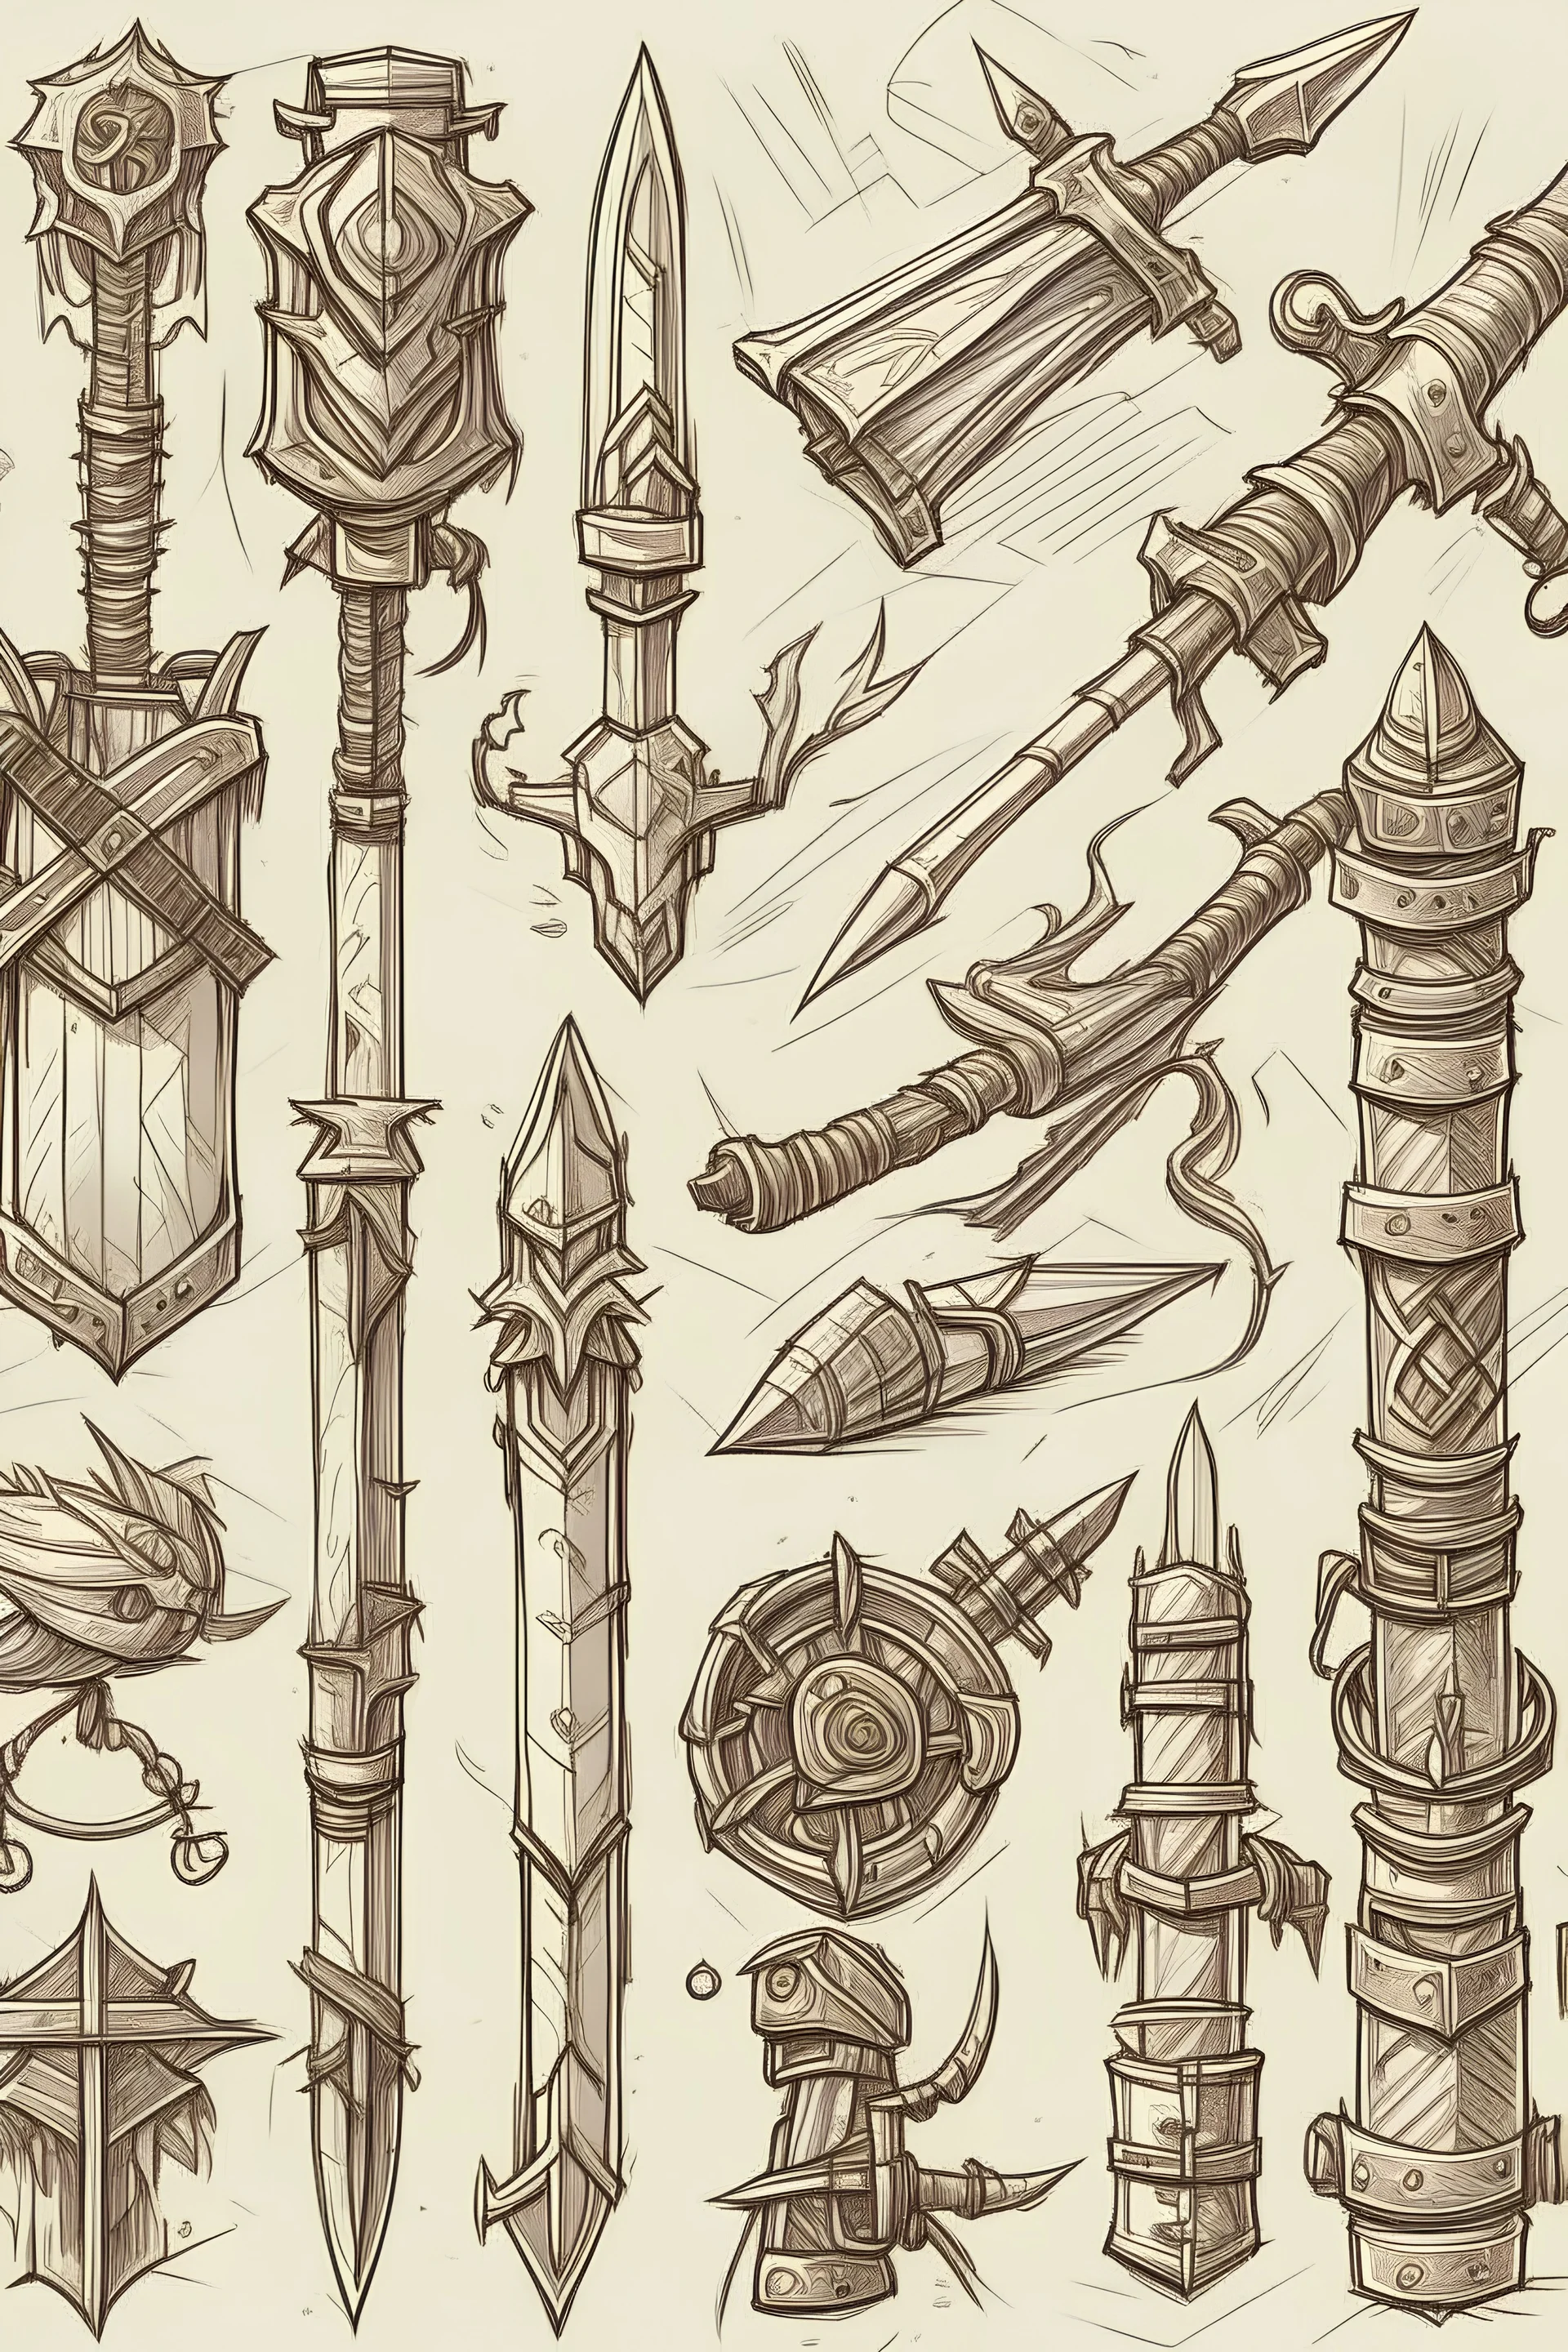 A Set of weapons for a d&d adventure. Sketch drawing, osr style